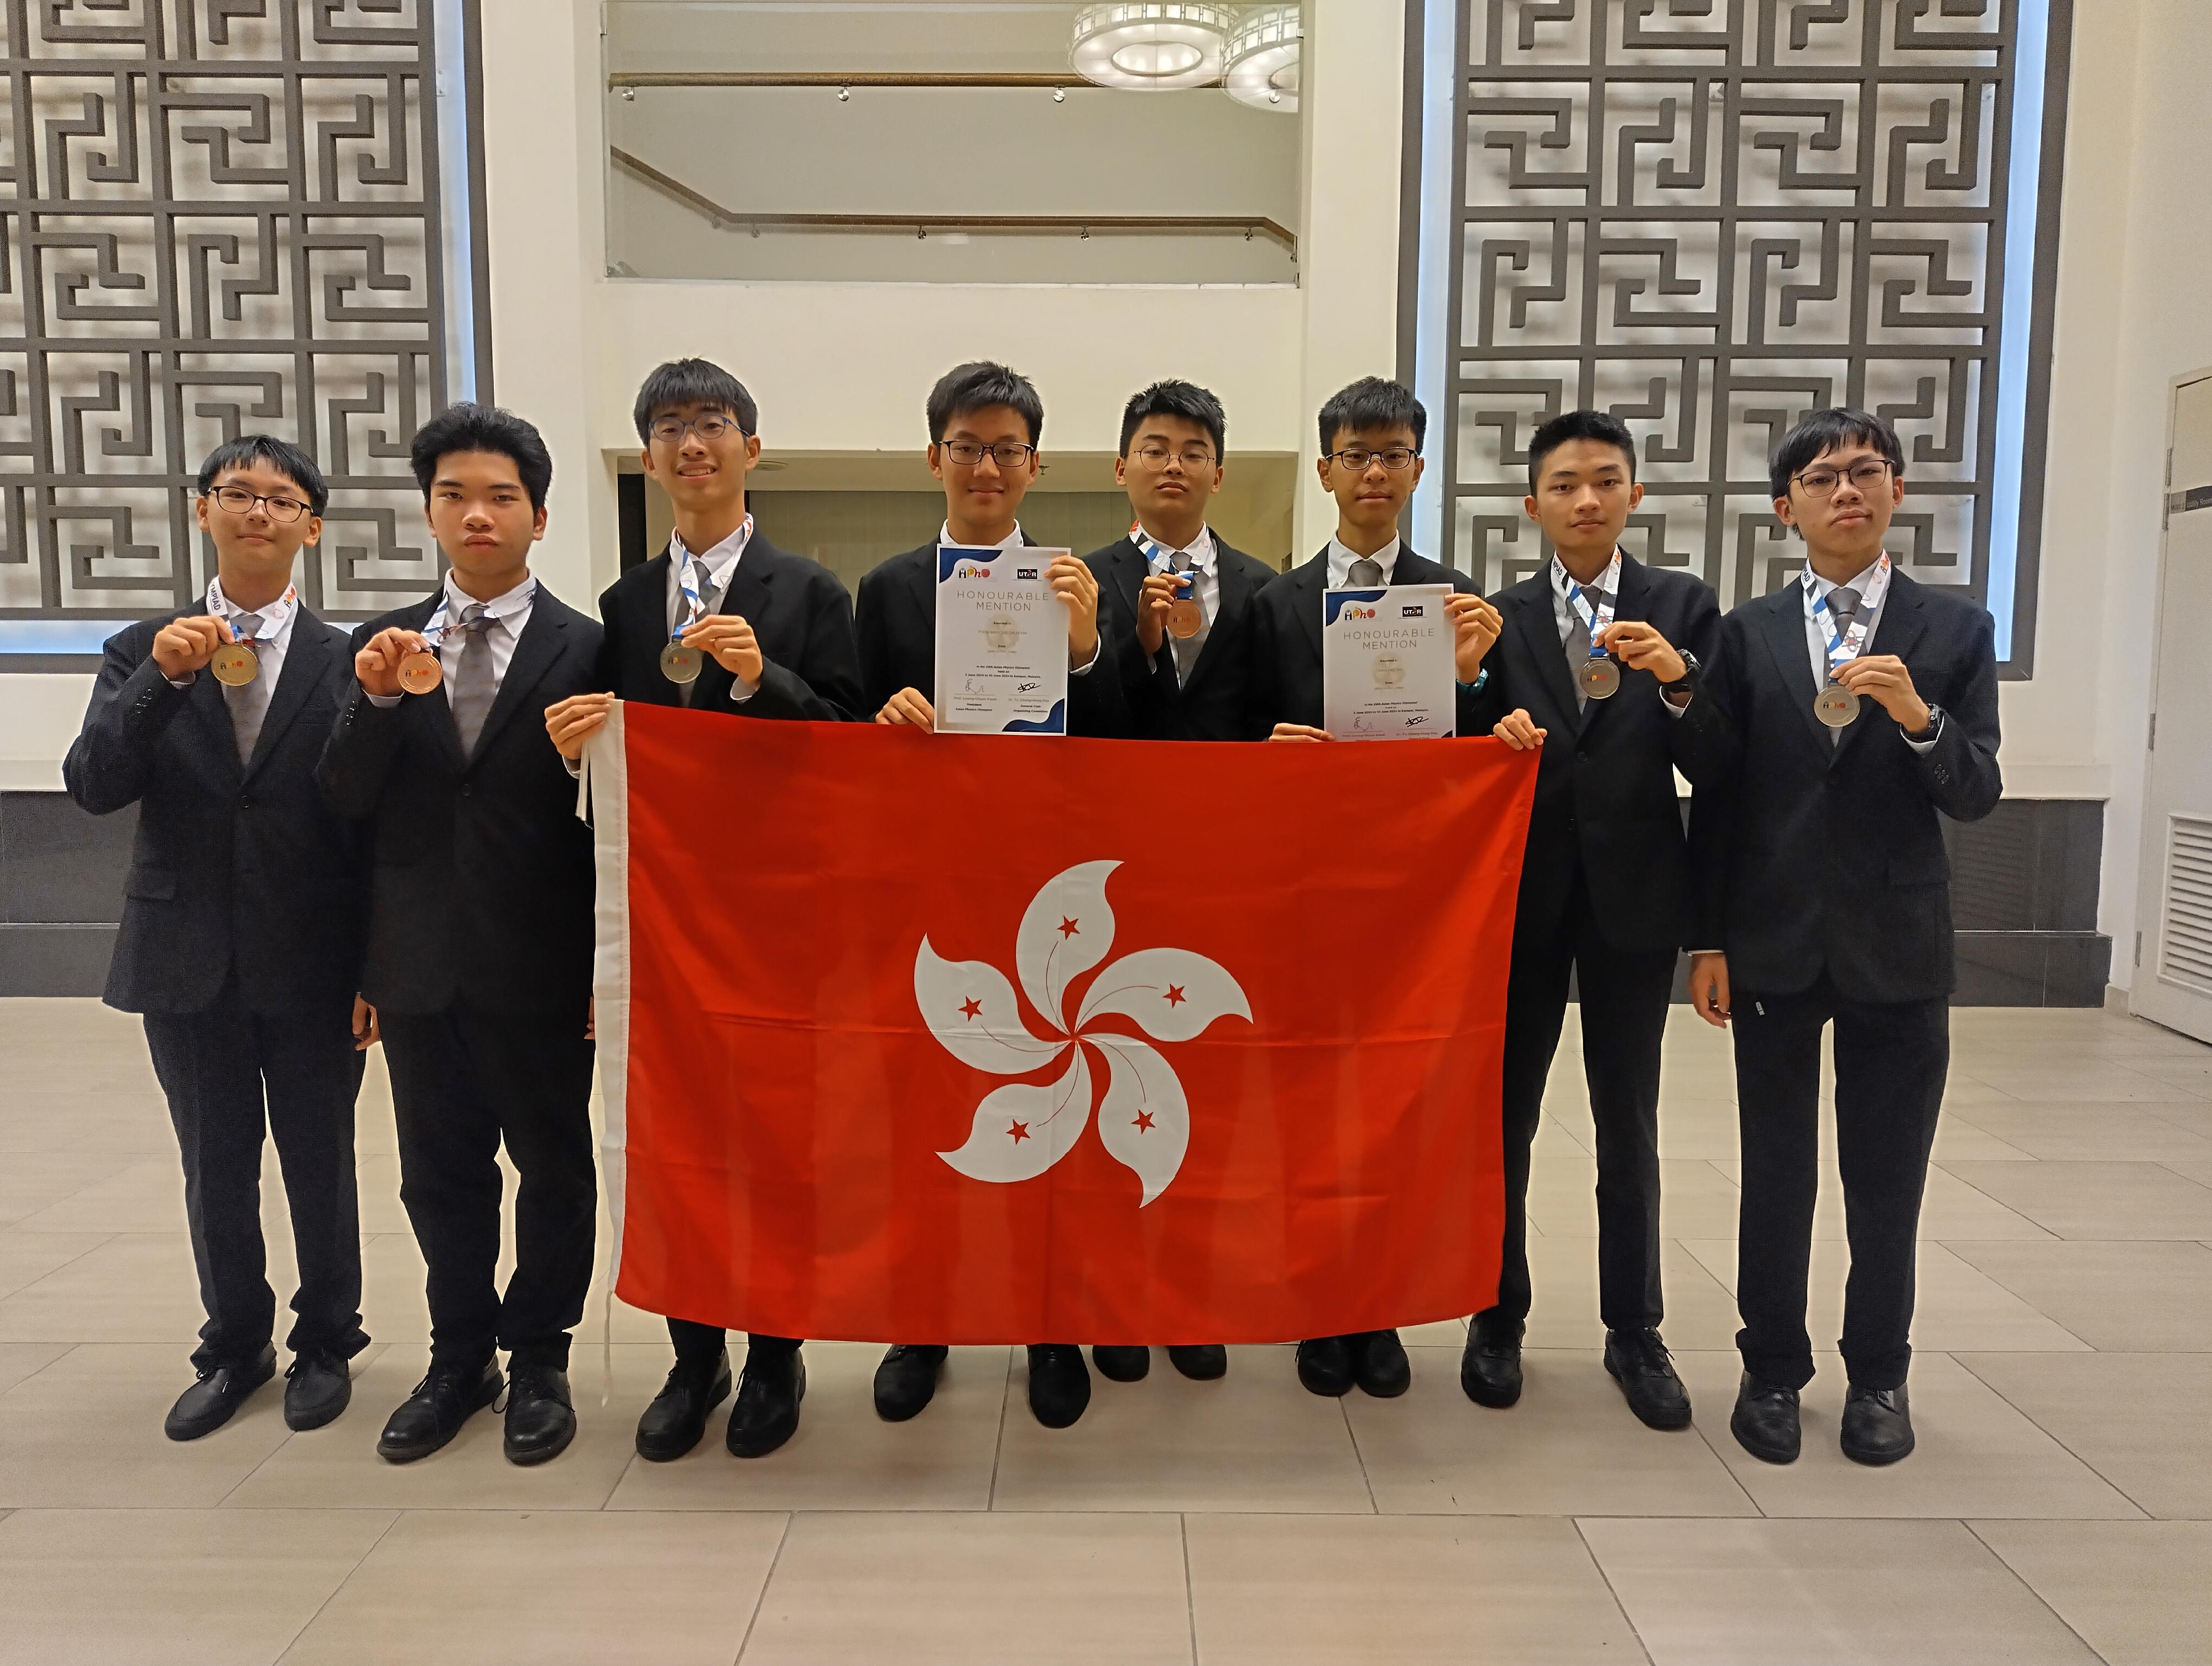 Eight students representing Hong Kong achieved excellent results in the 24th Asian Physics Olympiad held in Malaysia from June 3 to 10. They are (from left) Liu Lincoln, Matthew Mui, Yan King-yiu, Marcus Poon, Michael Tang, Chan Hoi-chi, Edison Fu and Leung Chi-fung.